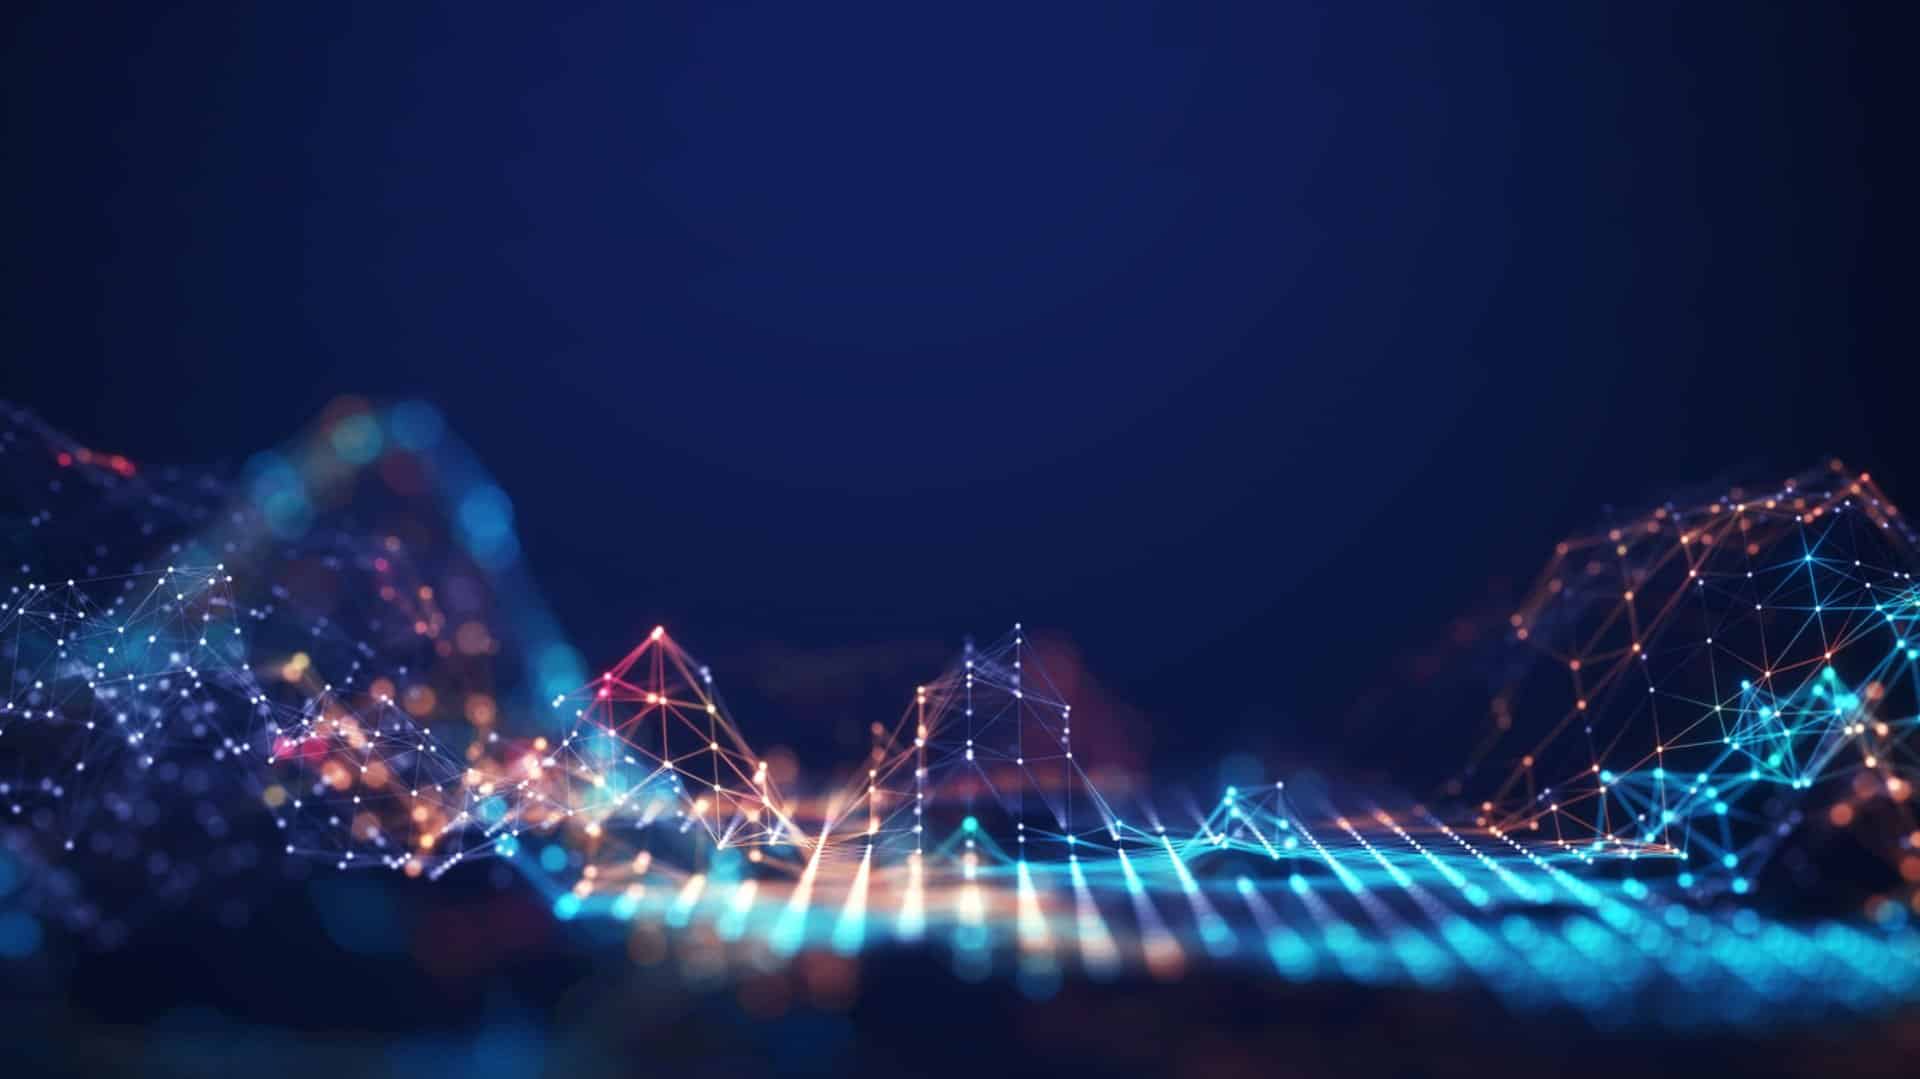 Abstract digital landscape with glowing, colorful neon light points and connecting lines forming peaks and valleys, symbolizing data or technology networks.